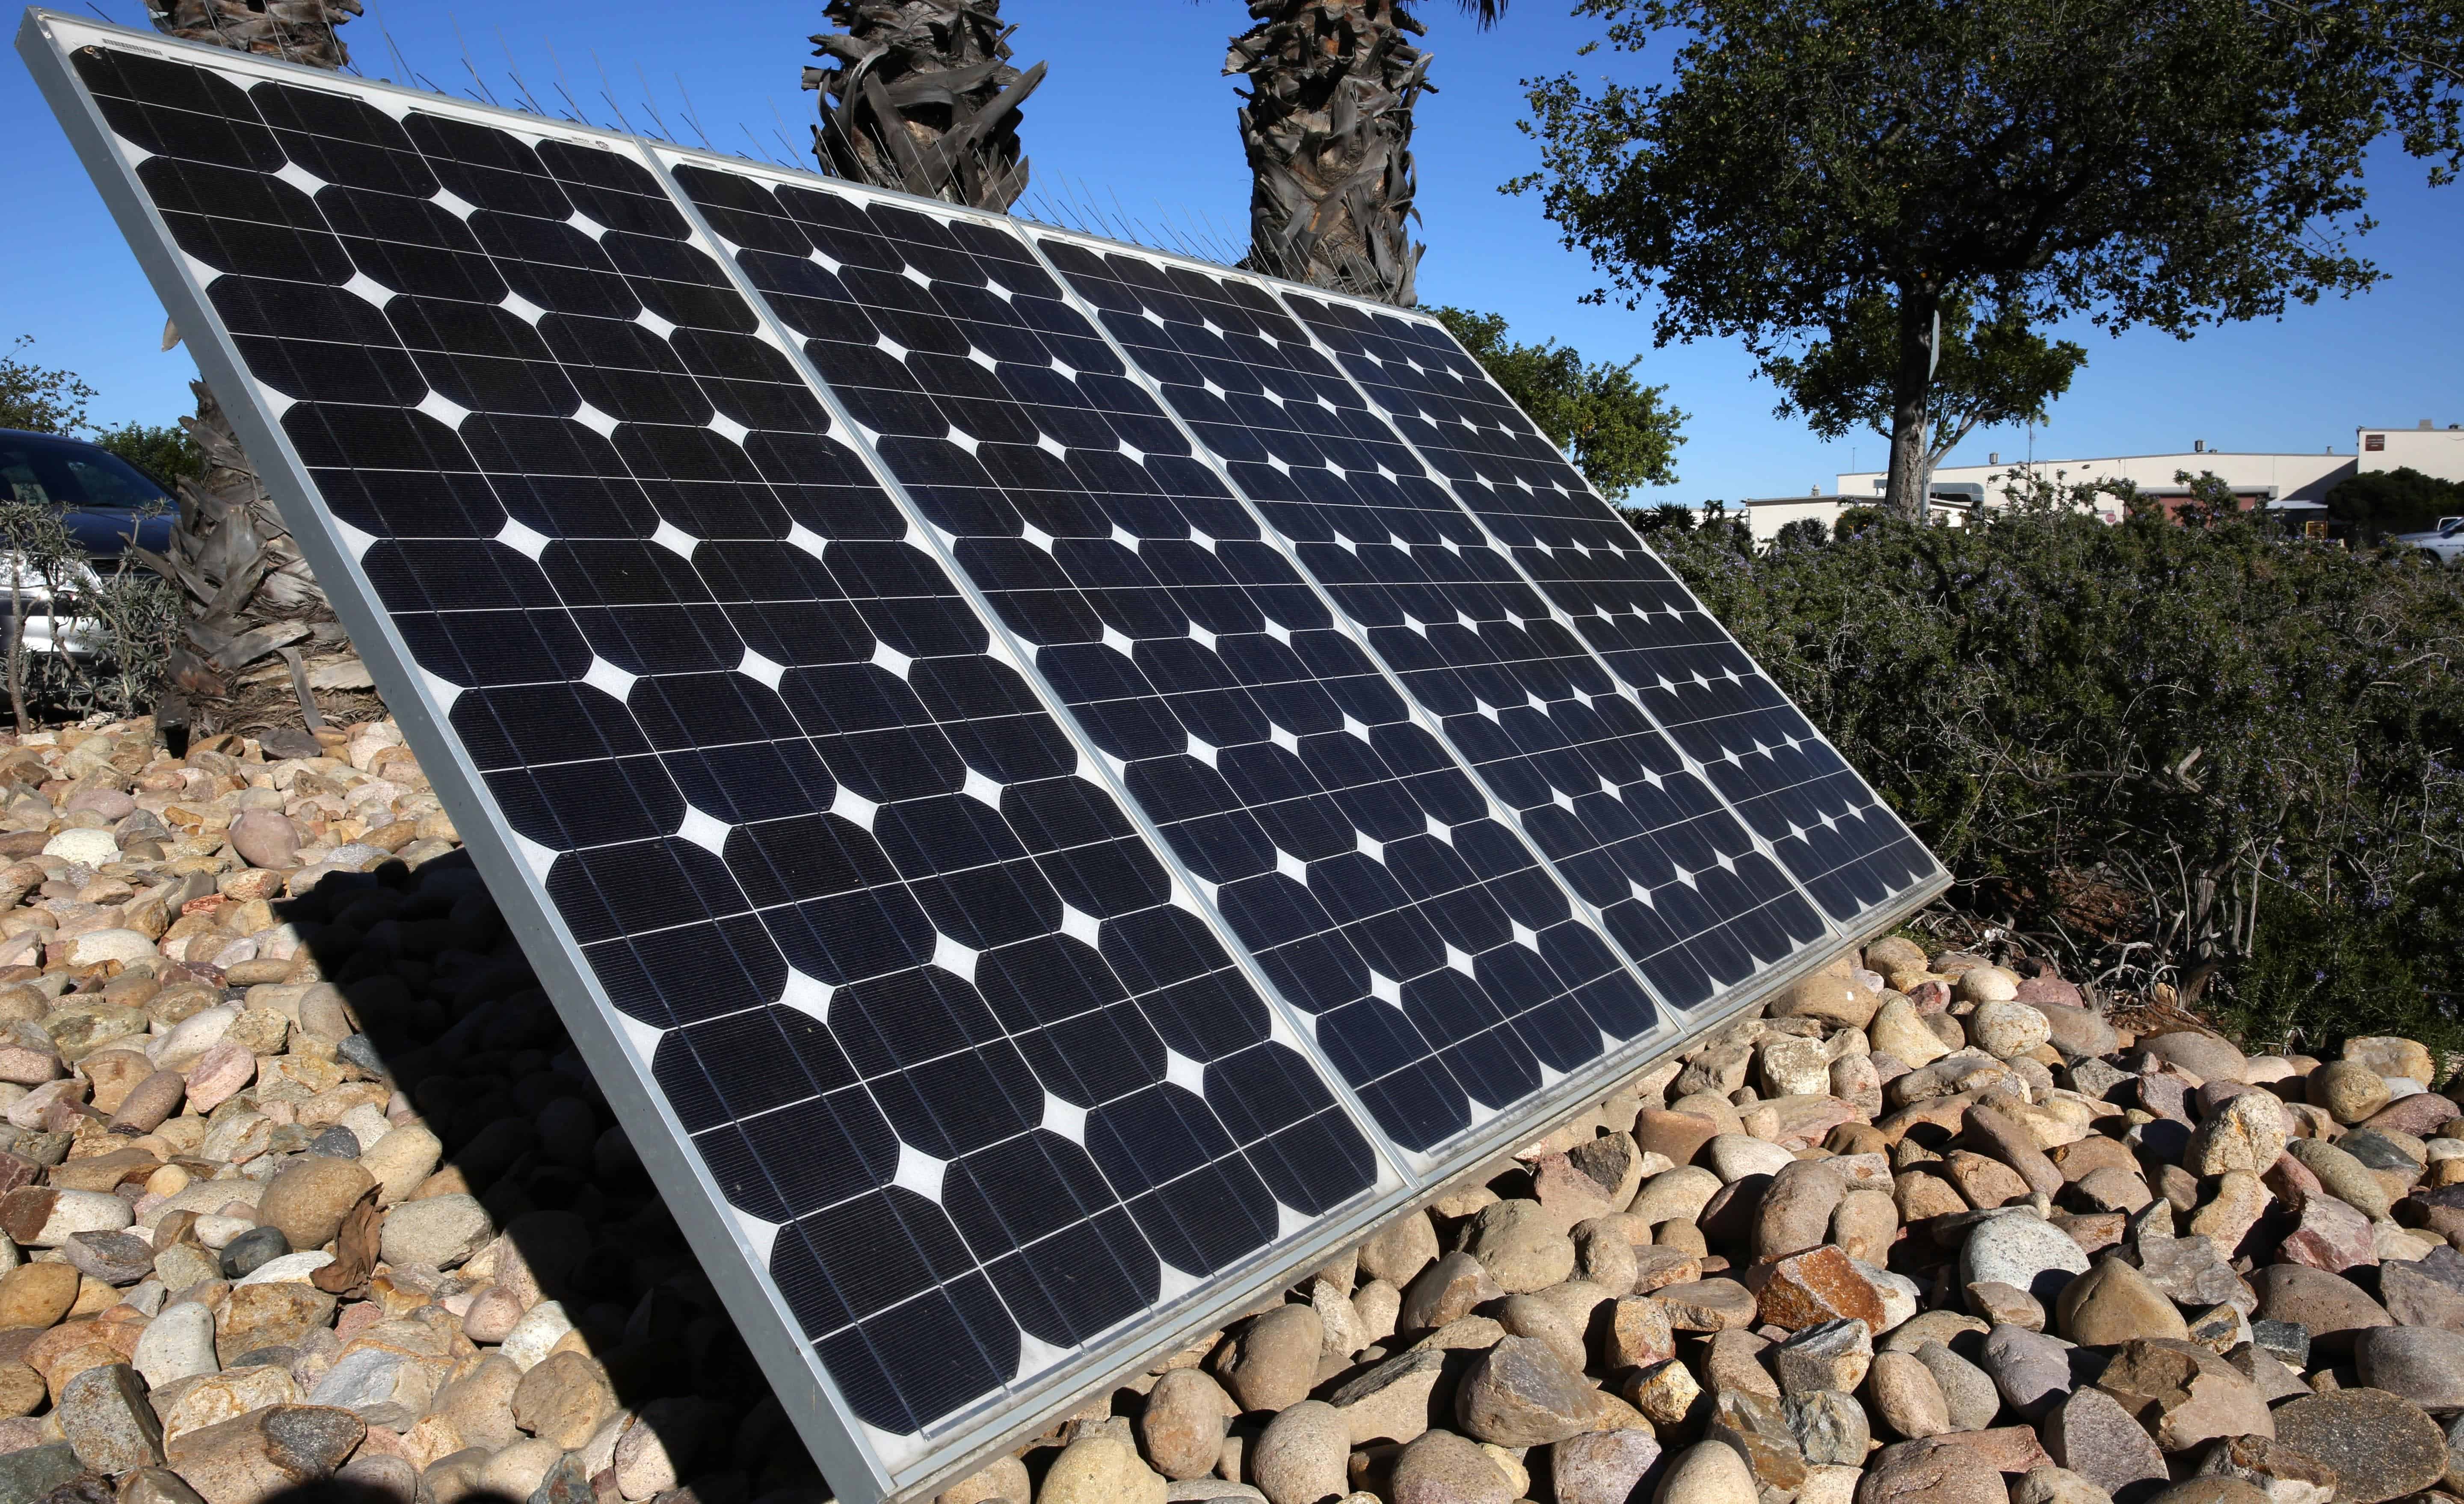 A Solar panel gathers light from the sun to provide energy at a Marine Corps Air Station in California. Image credits: DoD.